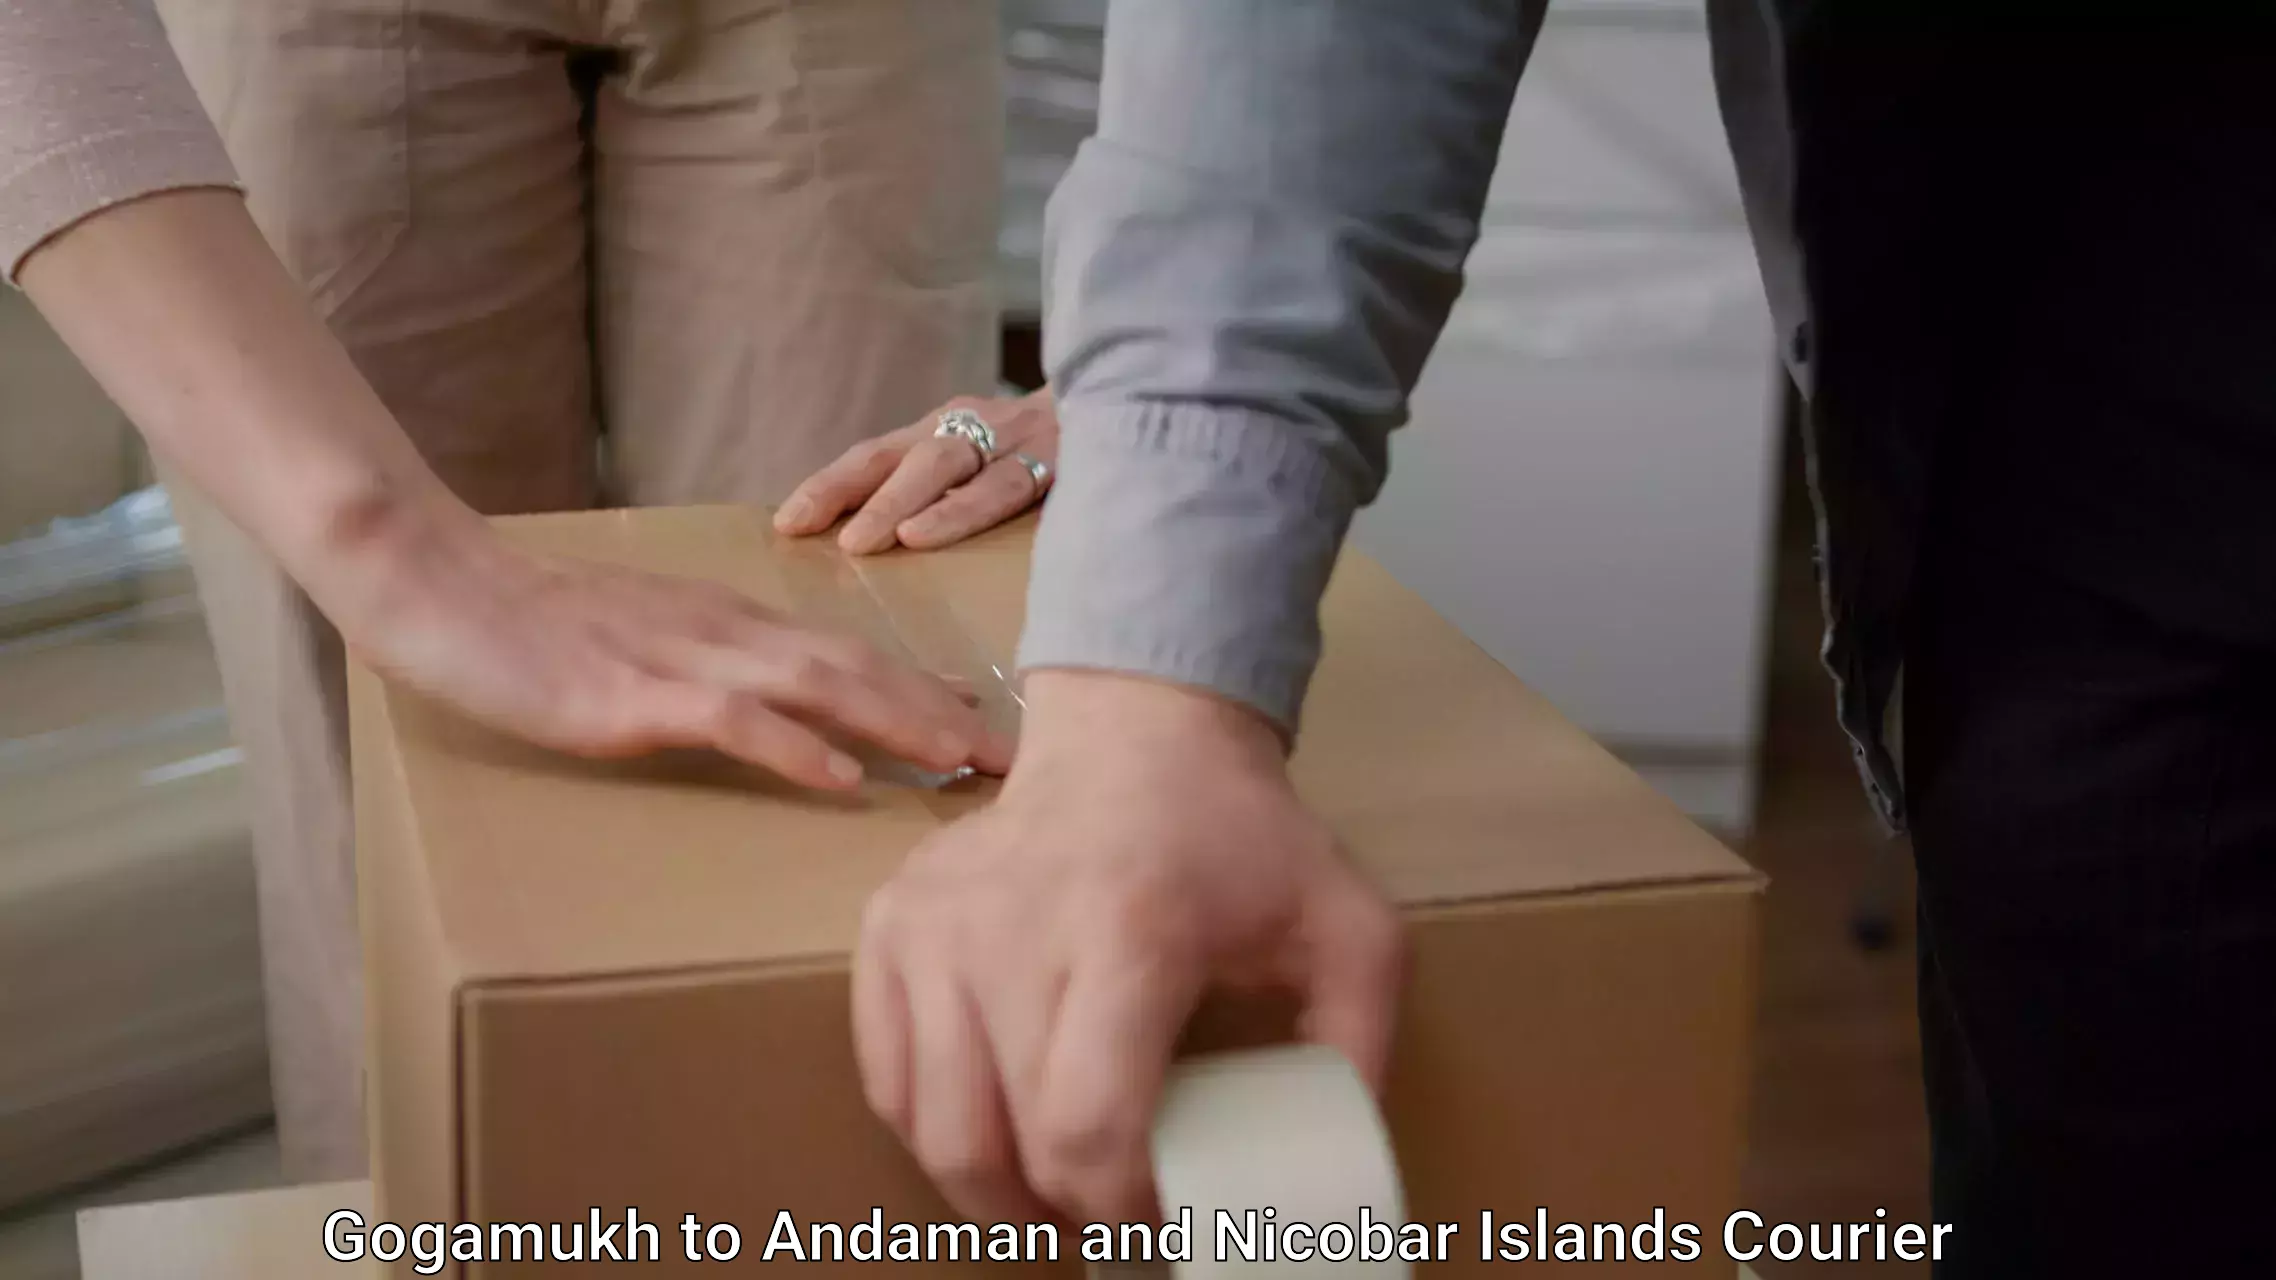 Furniture delivery service Gogamukh to Andaman and Nicobar Islands